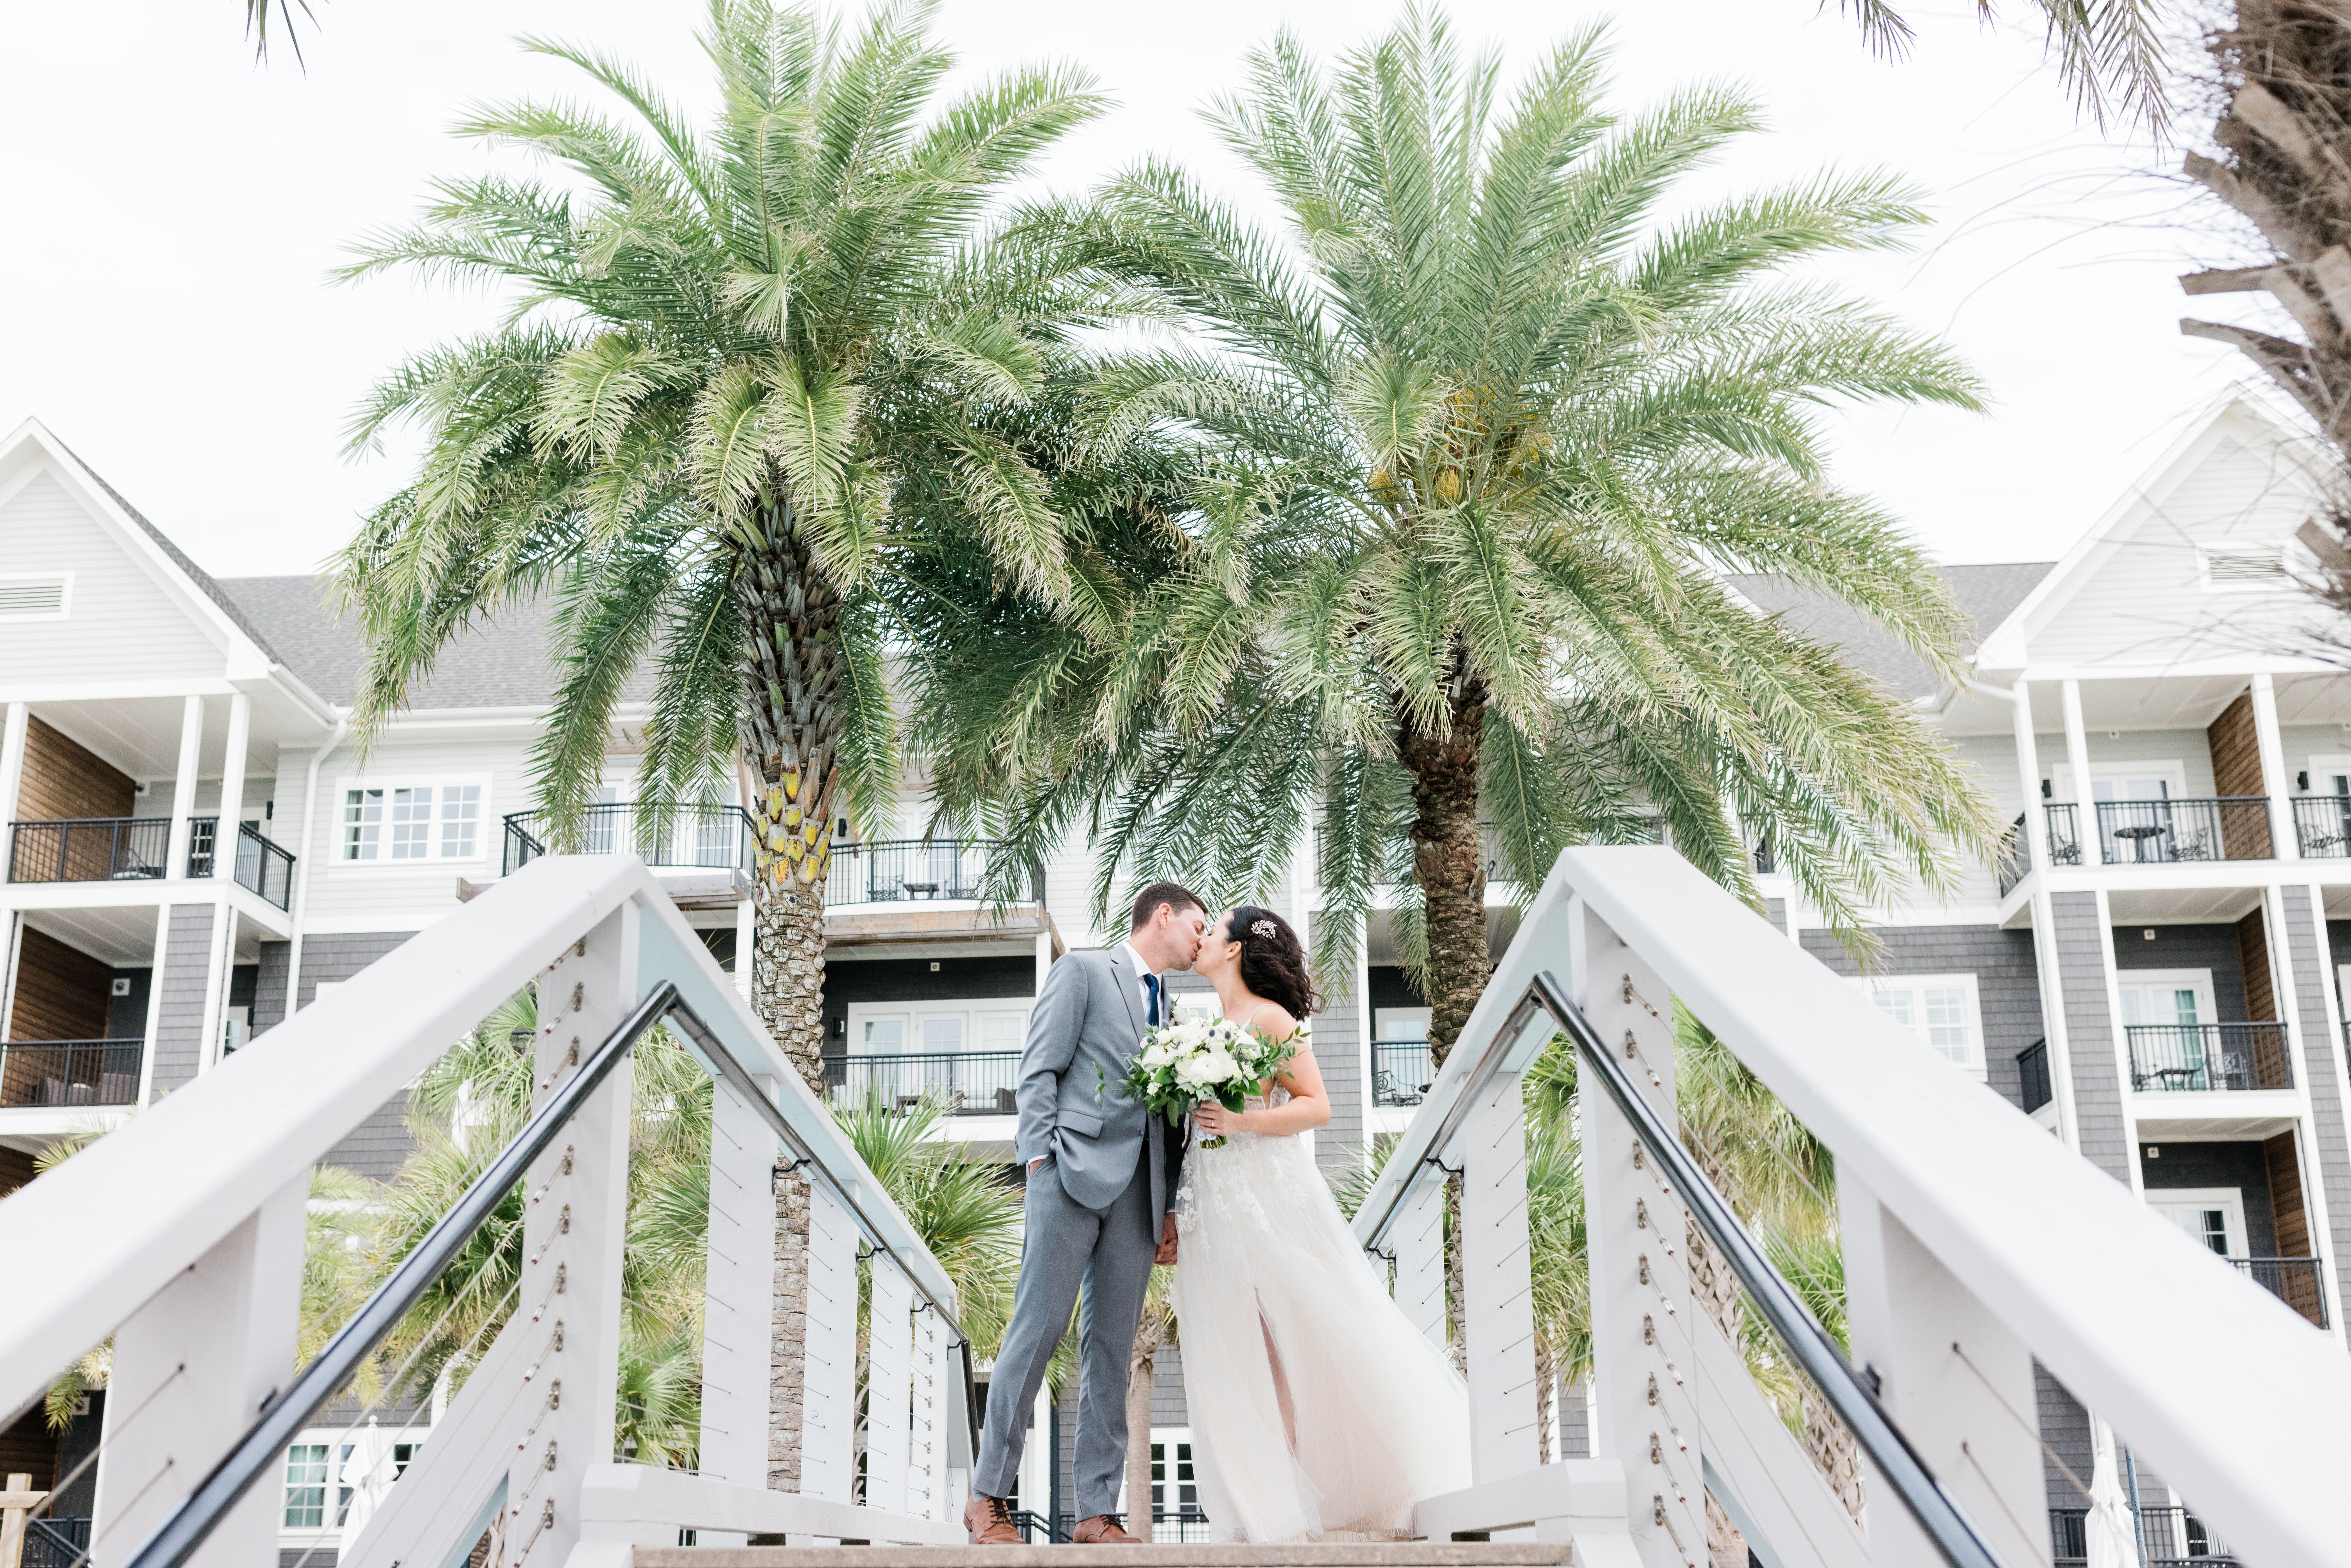 Wedding at the Henderson Resort in Destin, Florida during the pandemic COVID-19 by Event, Fitness and Wedding and Elopement Photographer Adina Preston.